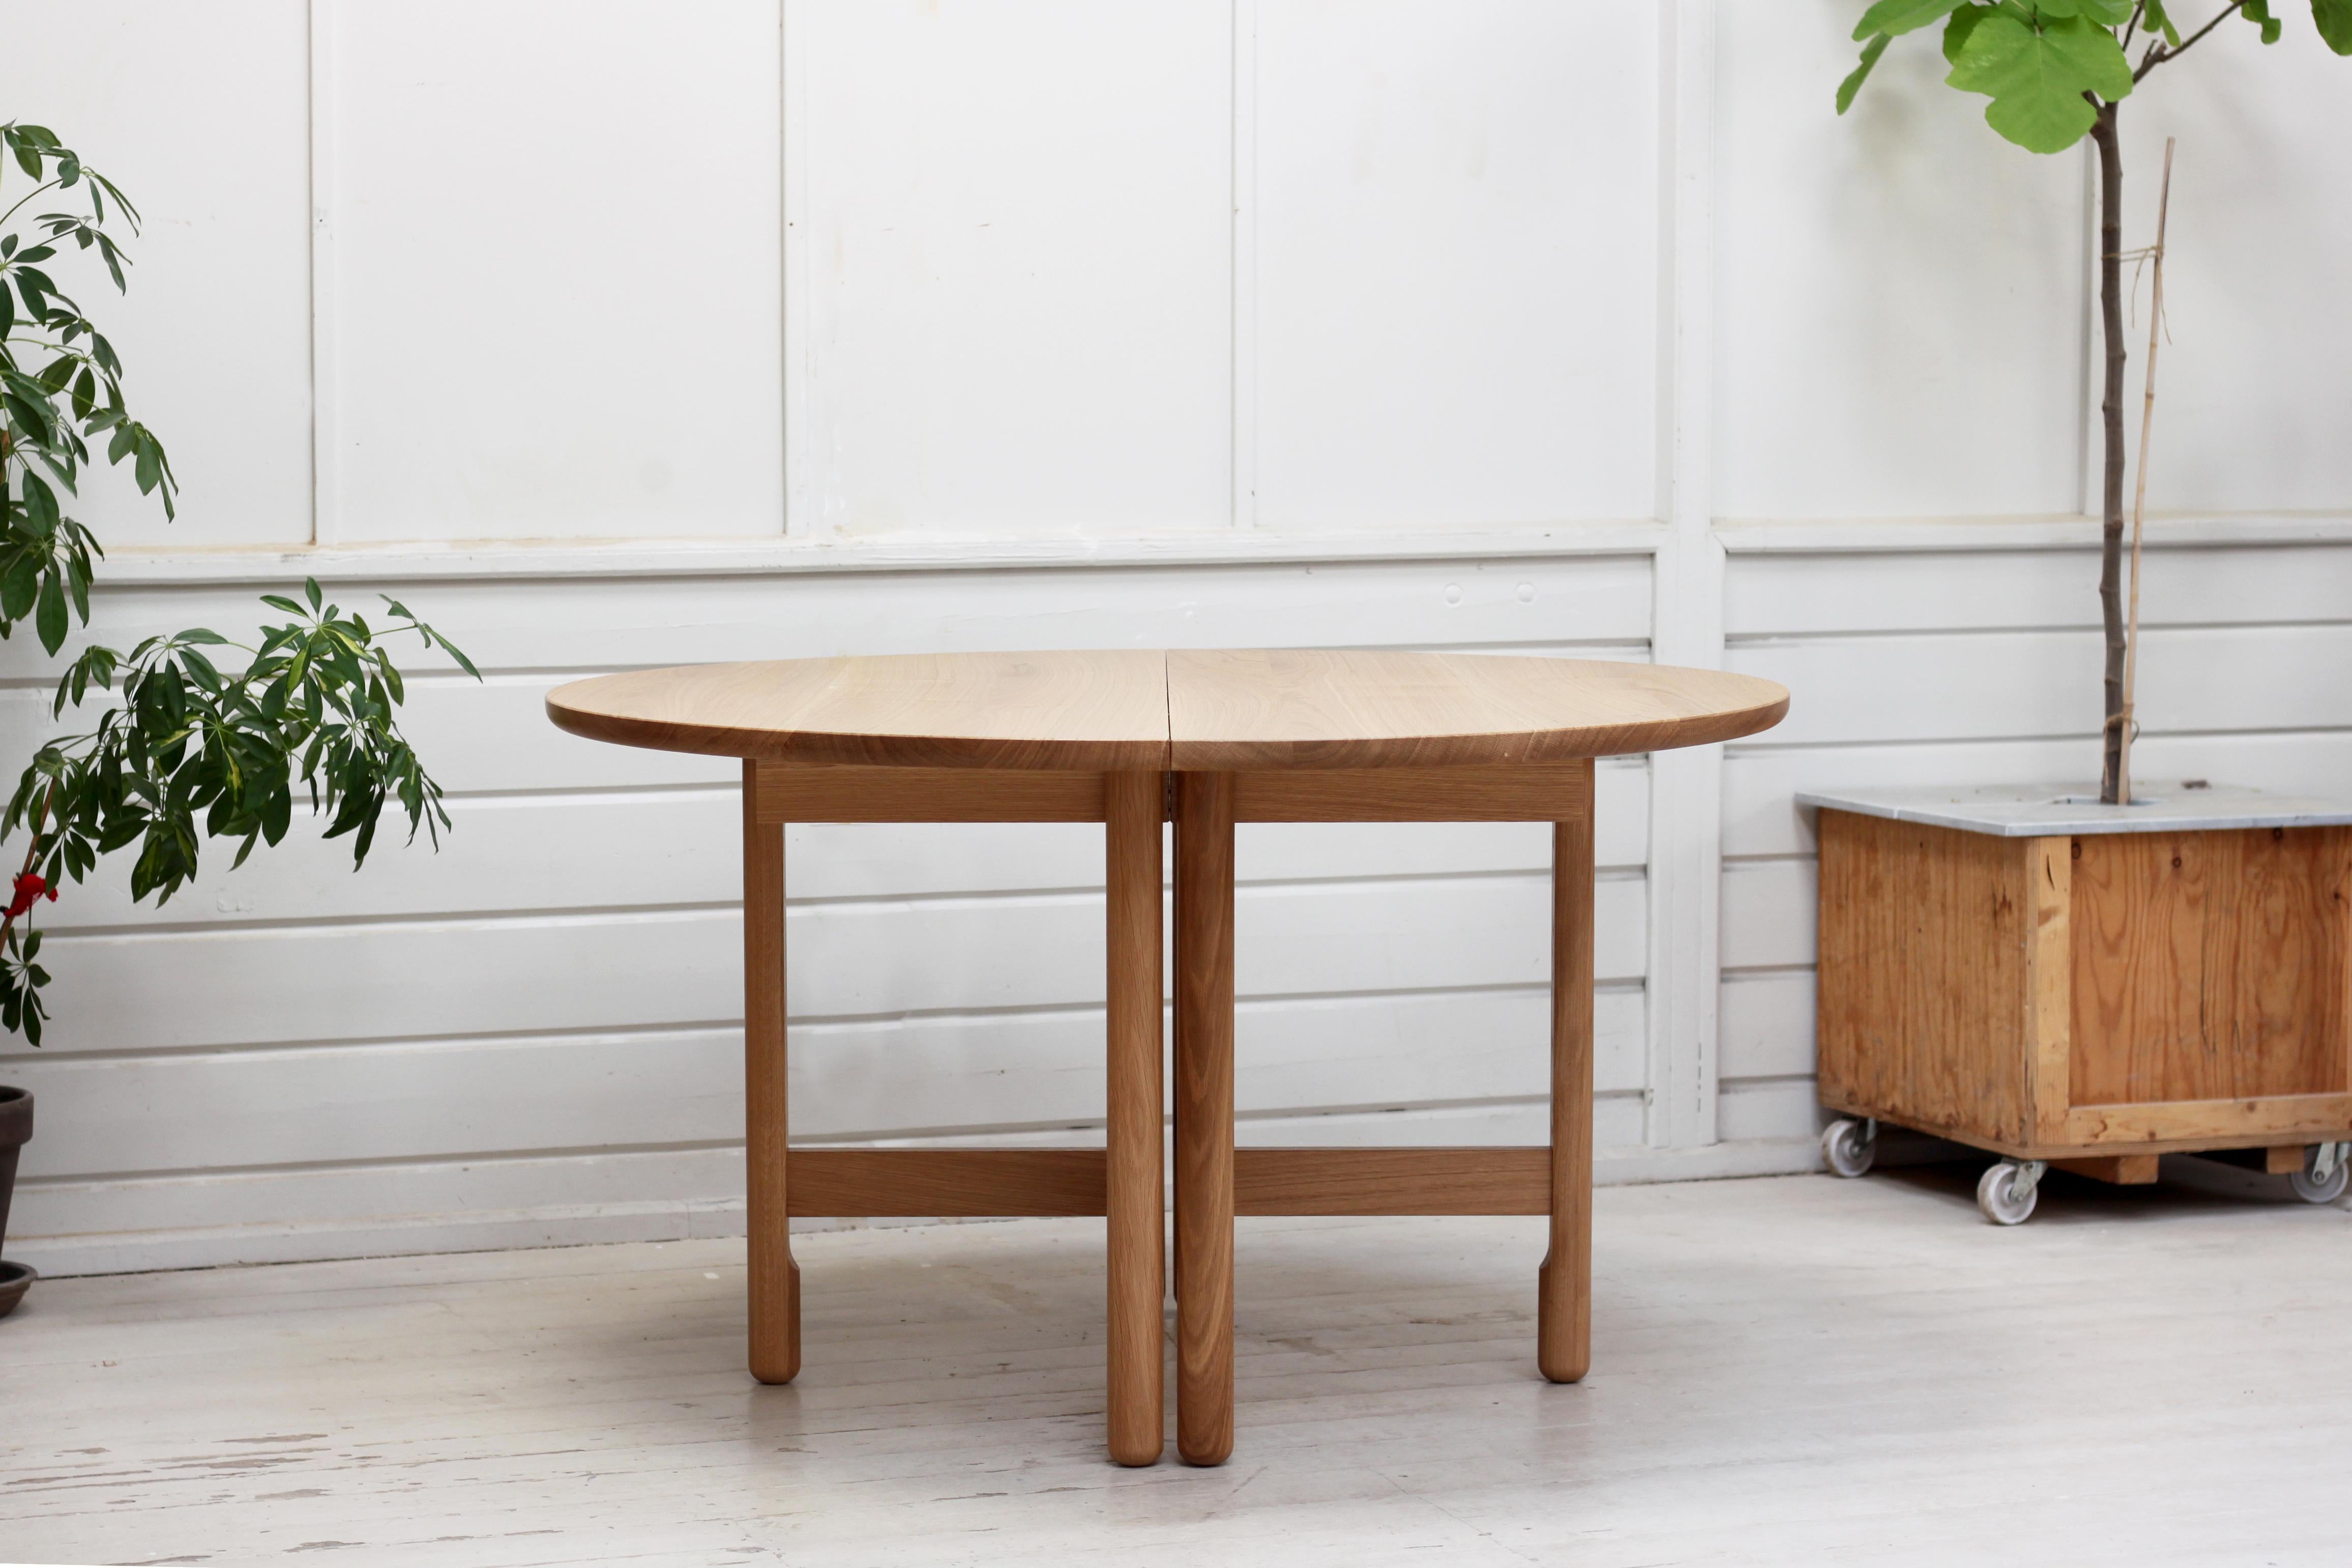 Handmade Thea Dining Table, Extendable Ø130cm - Painted Oak - by BACD studio For Sale 3